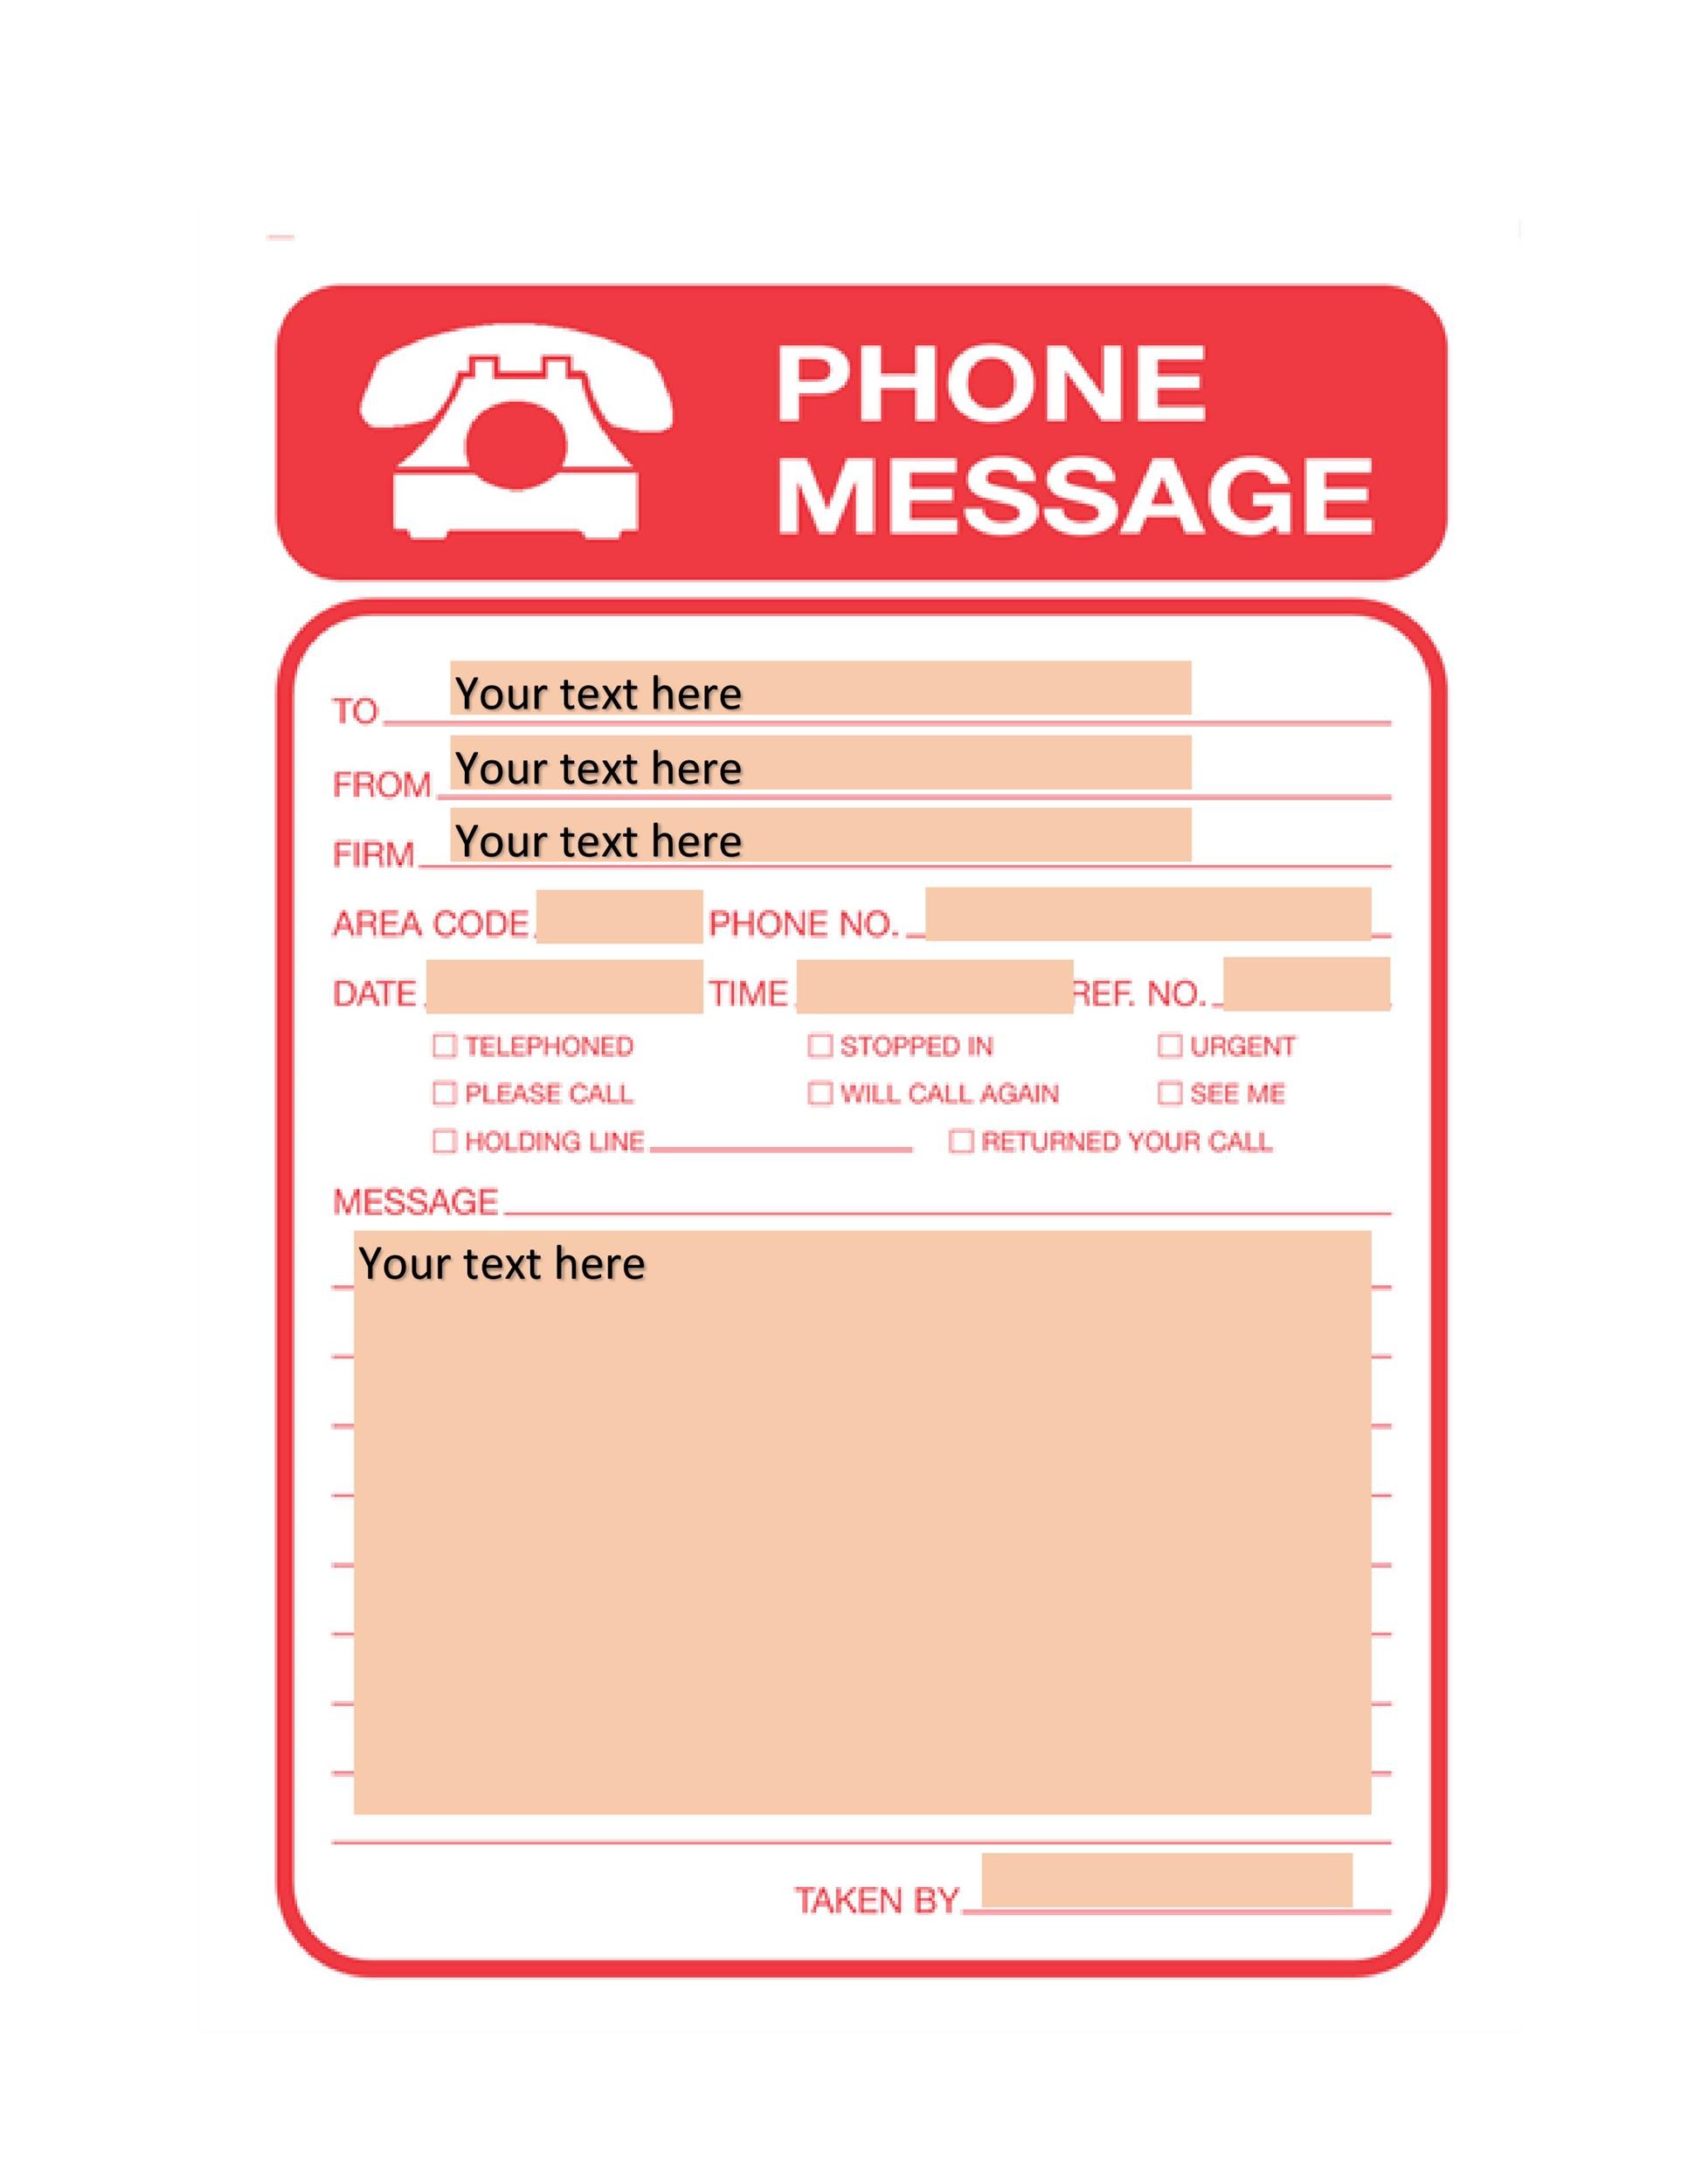 40-voicemail-greetings-phone-message-templates-business-funny